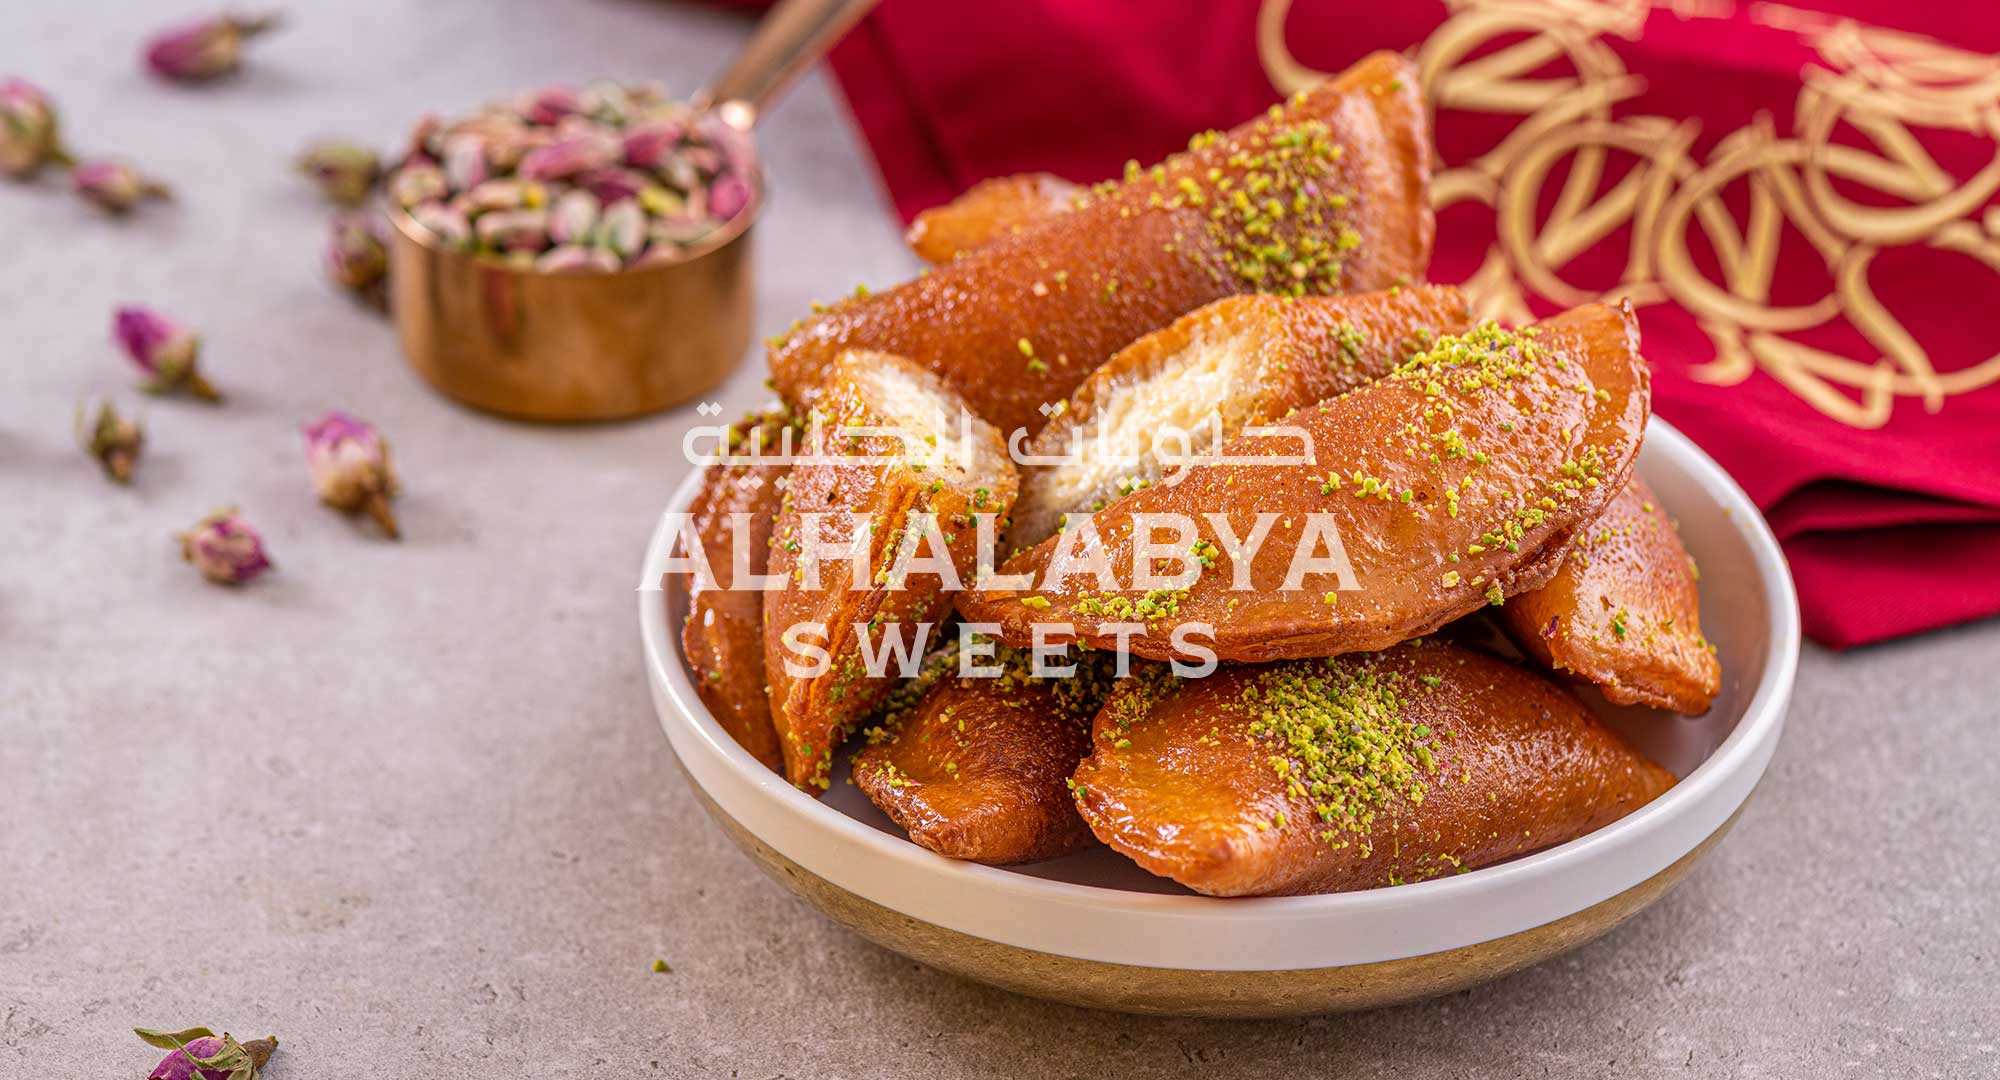 Placing Your Order with Al Halabya Sweets